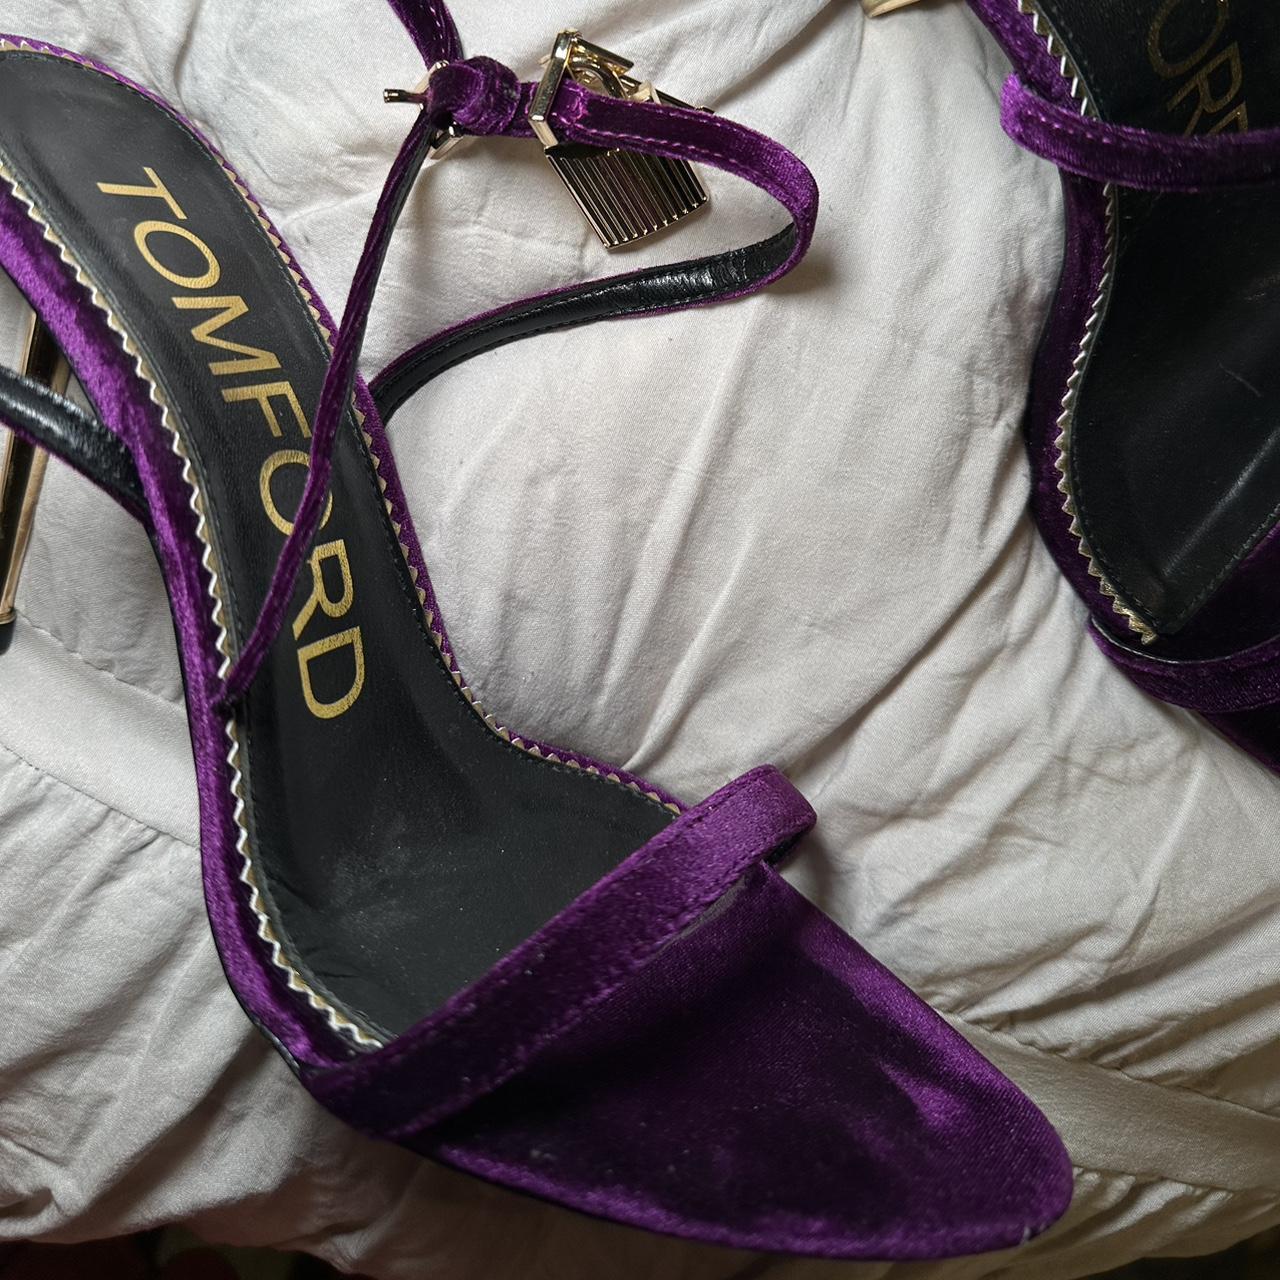 TOM FORD Women's Purple Courts (2)